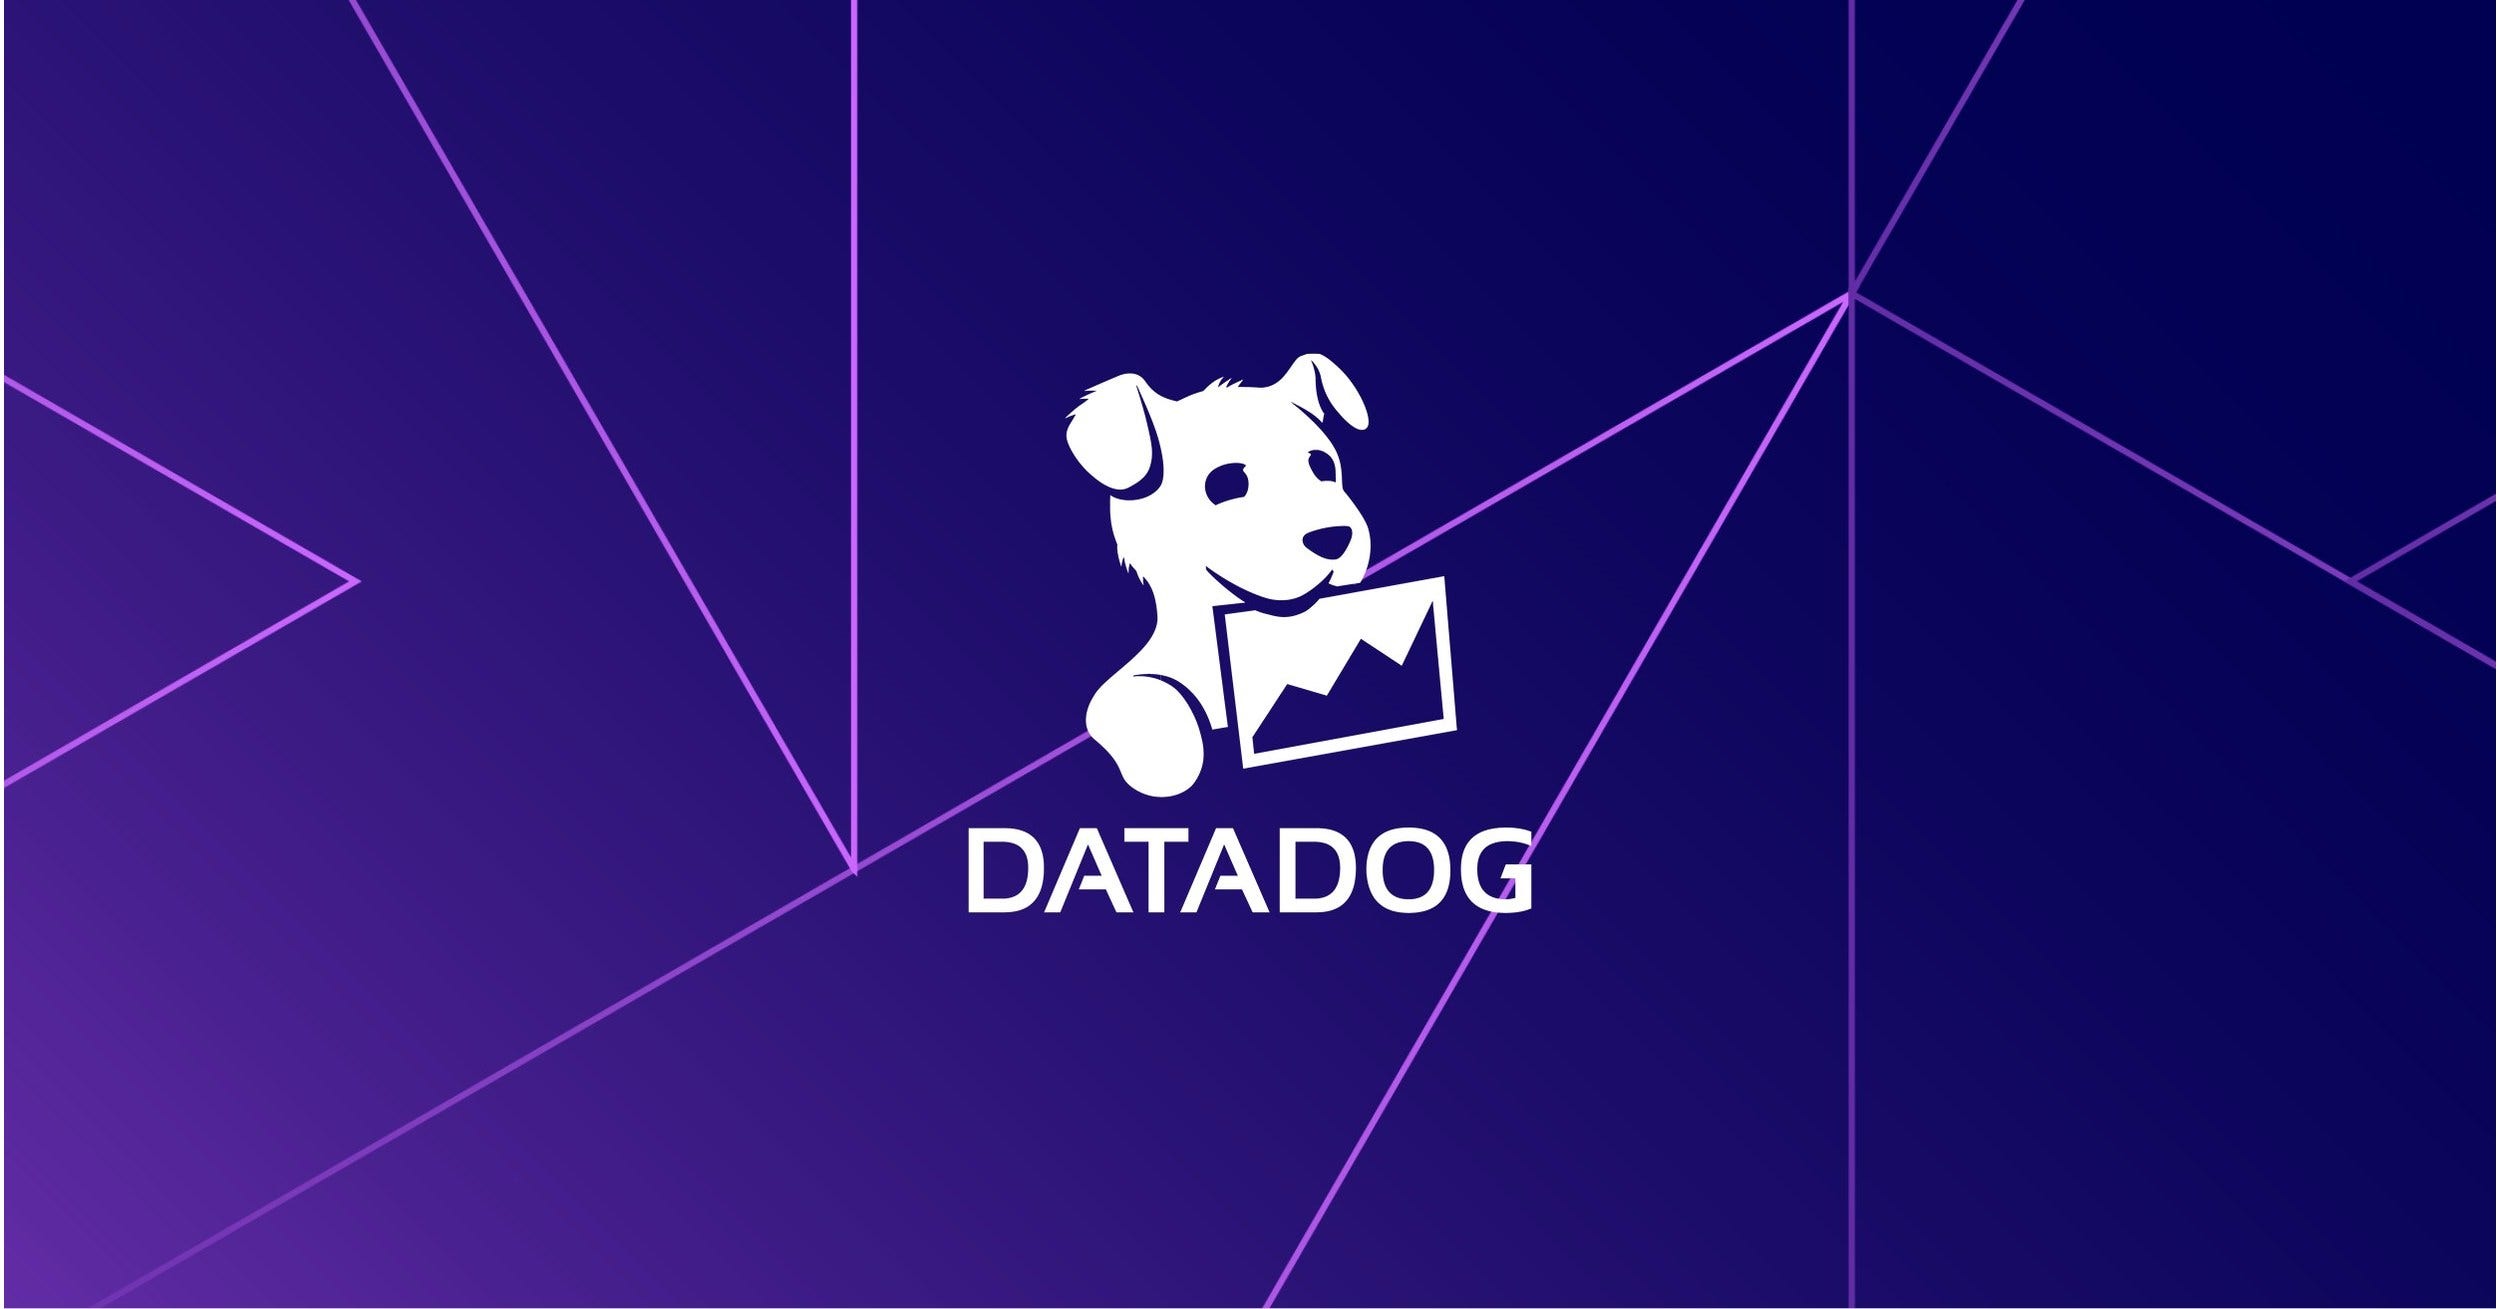 Could Datadog's TAM Reach $62B — Maybe $70B? Yes, But It Depends On This: Analyst